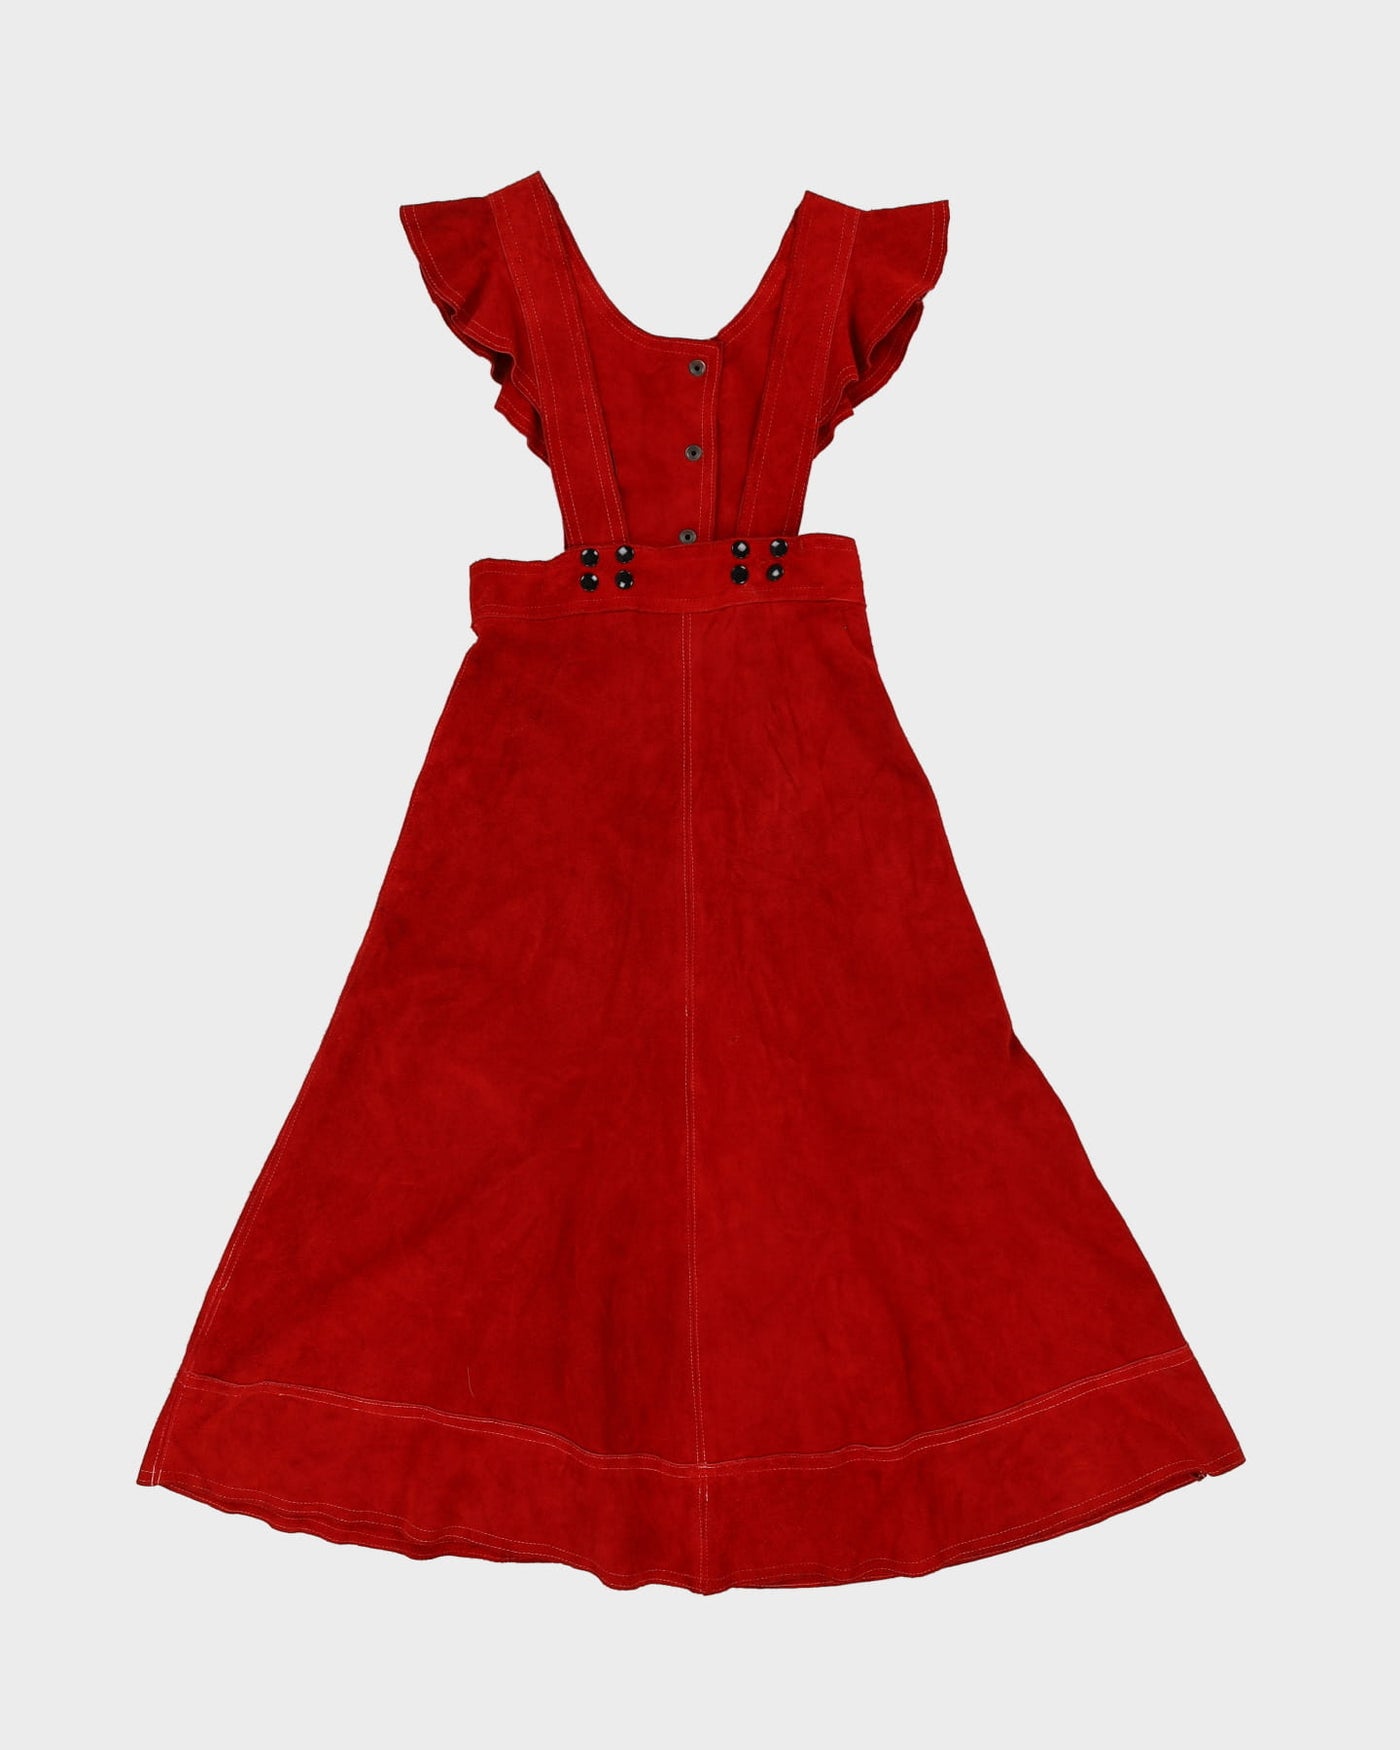 1970s Red Suede Apron Style Midi Dress - XS / S